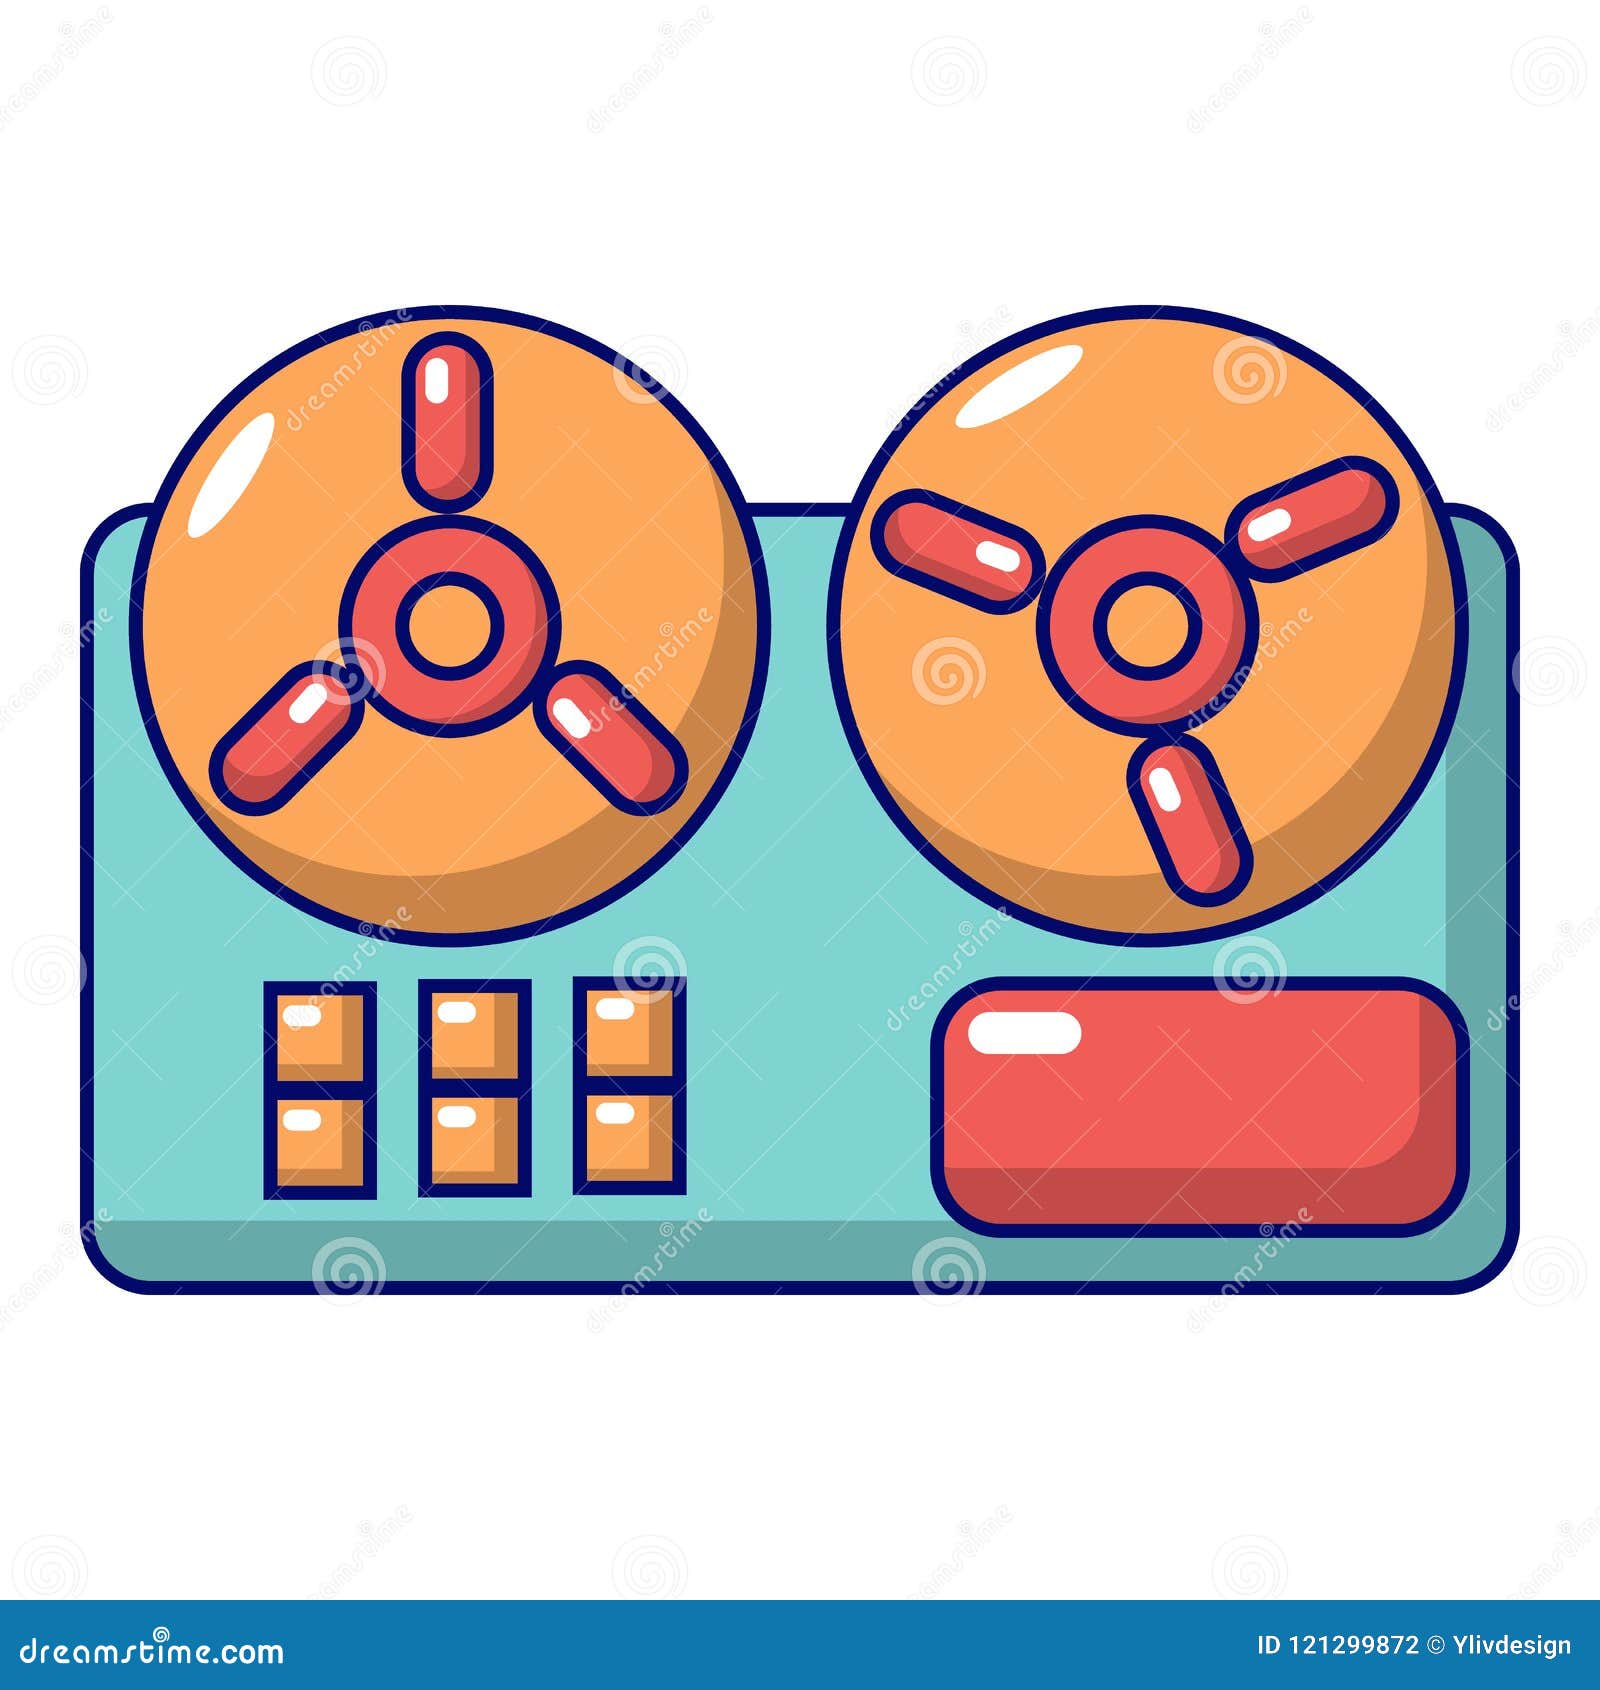 Reel To Reel Tape Recorder Icon, Cartoon Style Stock Vector